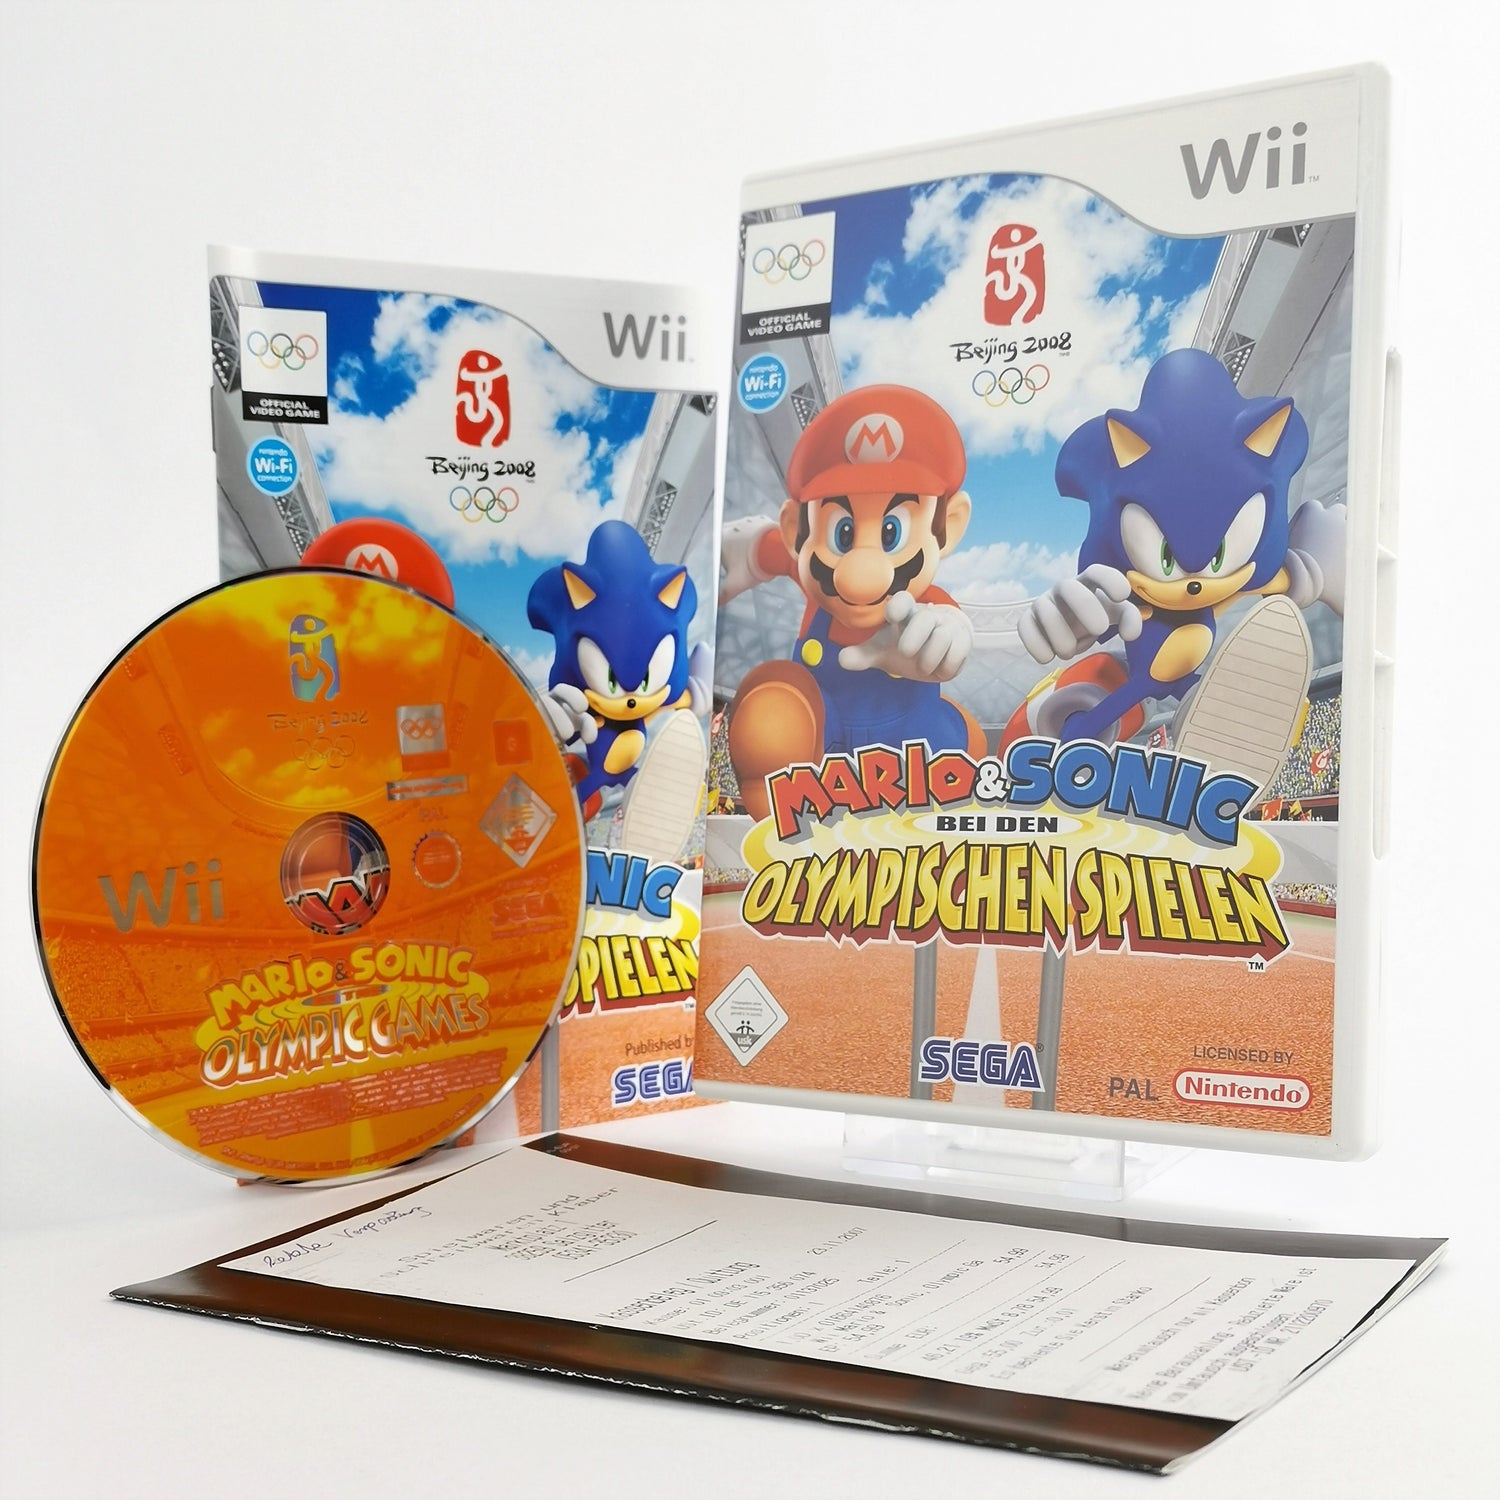 Nintendo Wii game: Mario & Sonic at the Olympic Games - original packaging & instructions